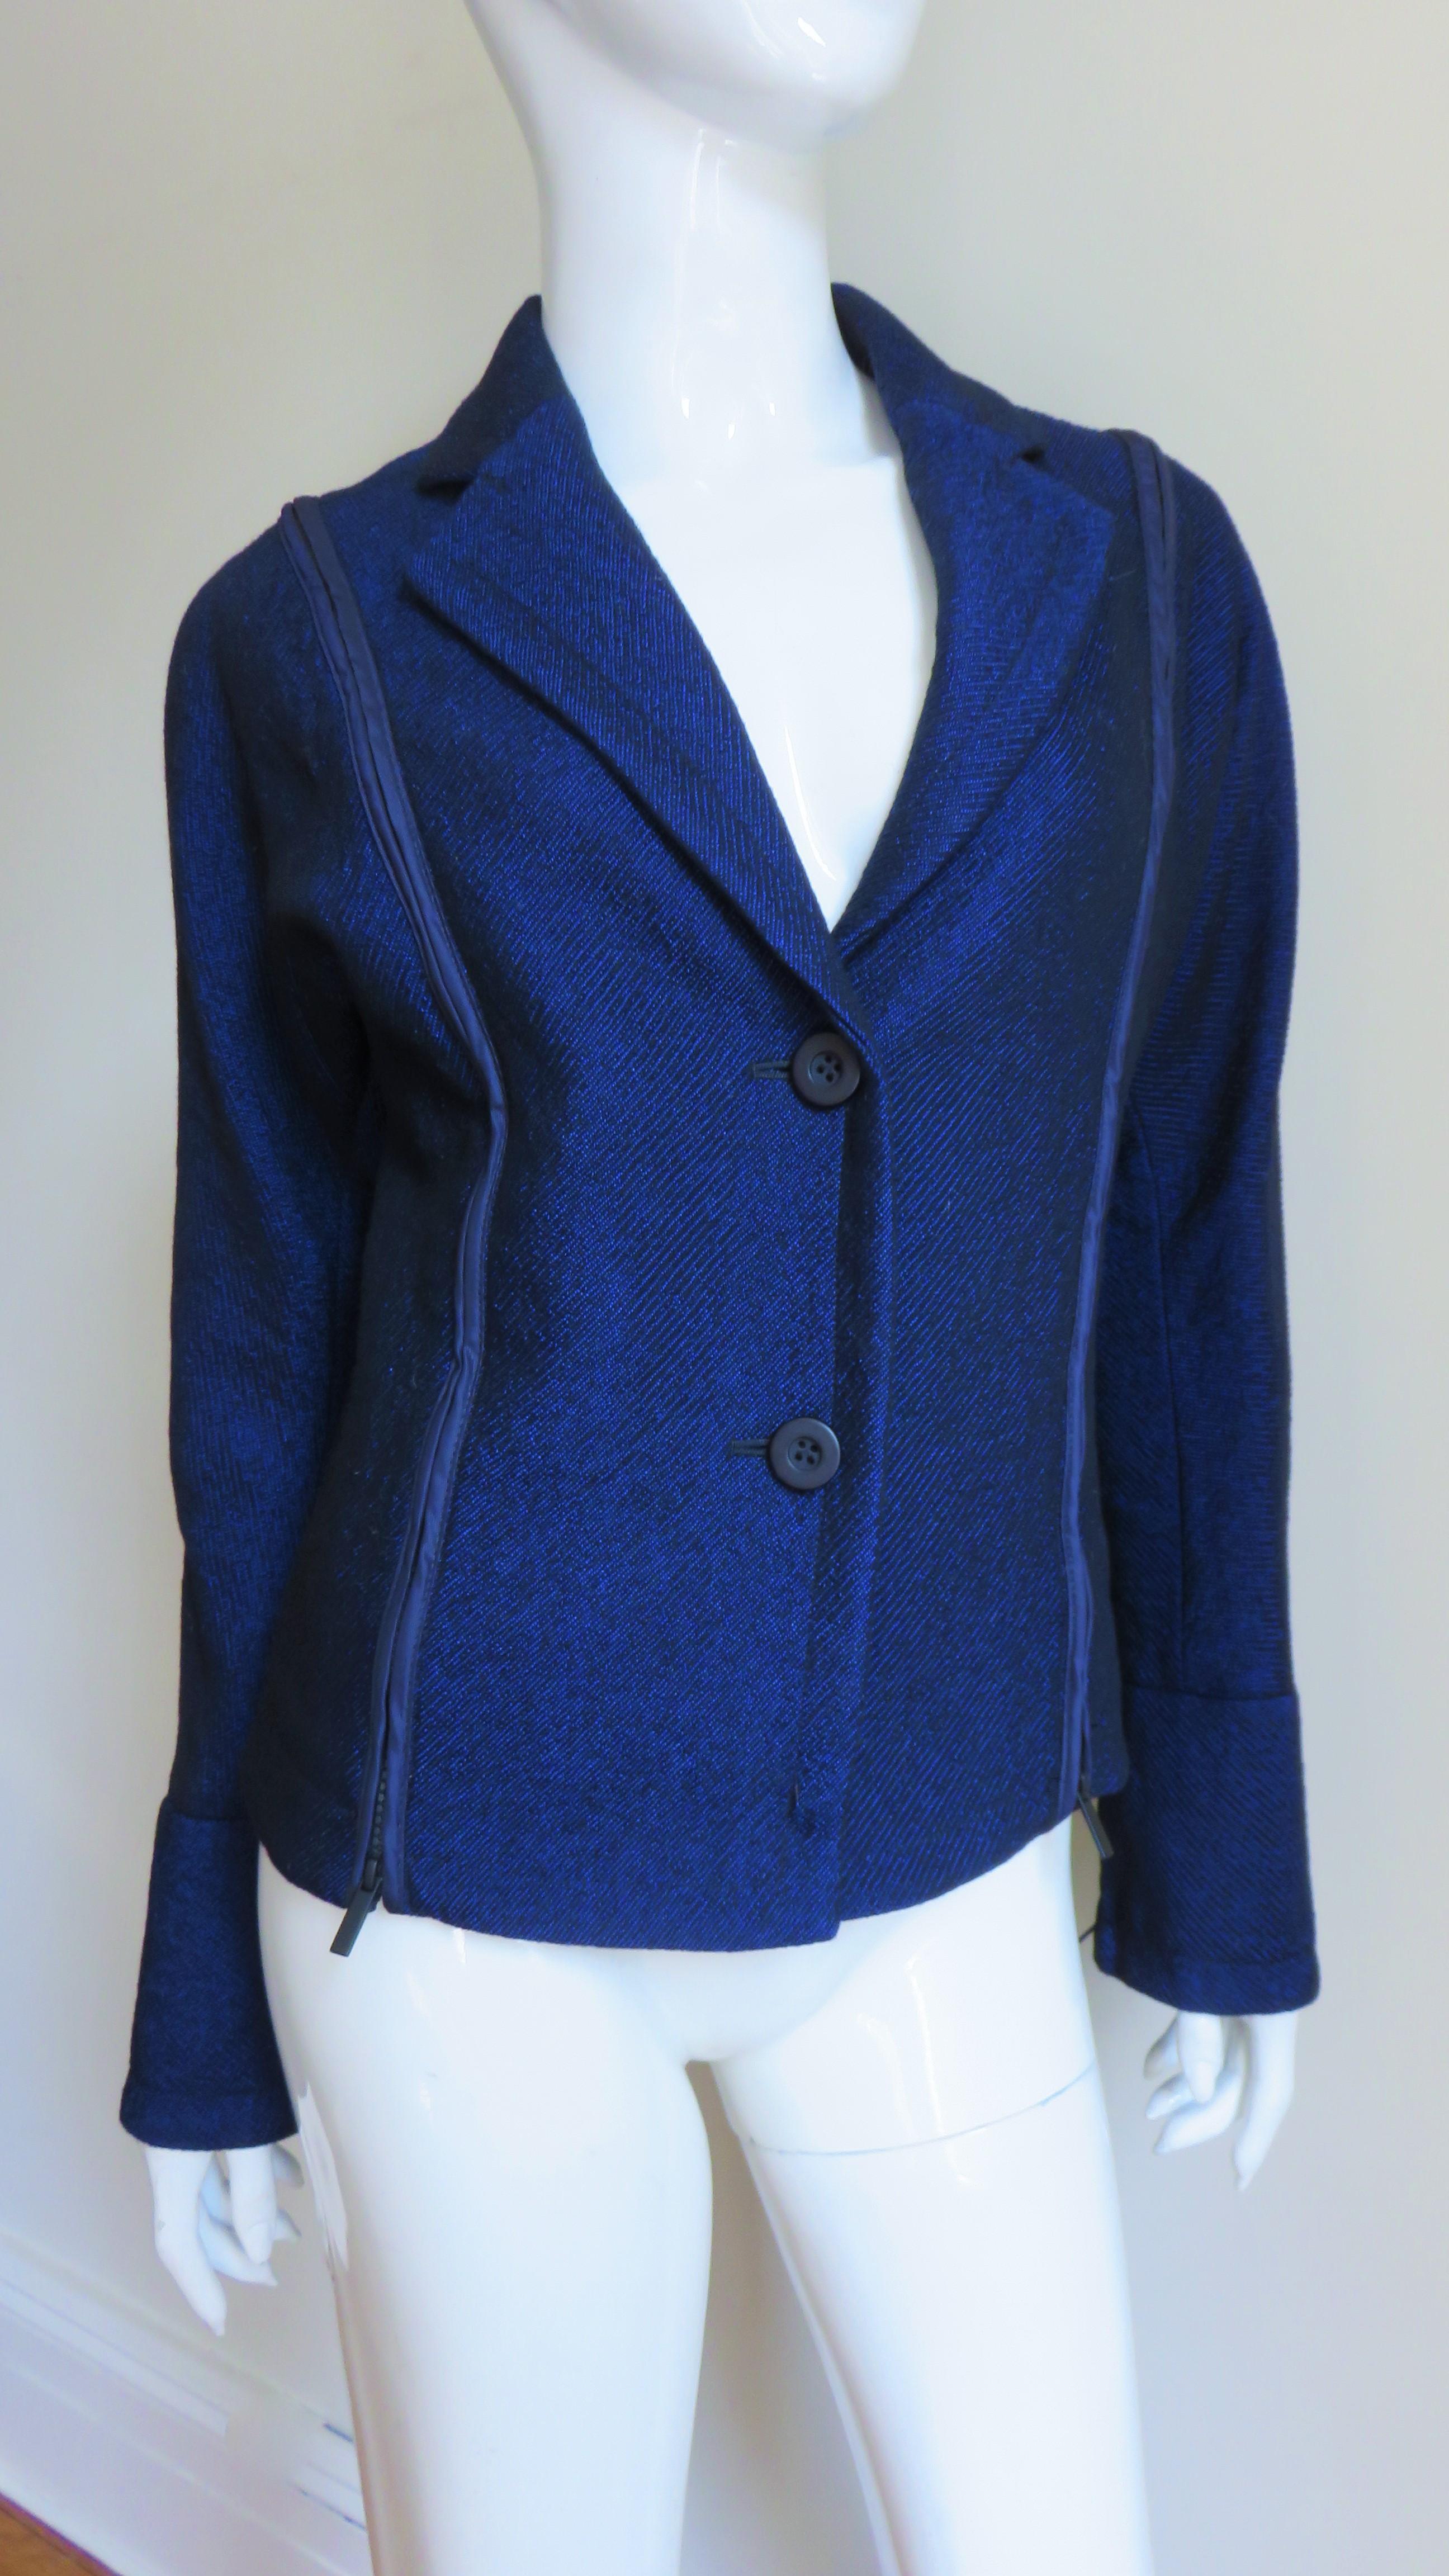 Issey Miyake Blue Wool Jacket with Zipper Parachute Panels In Excellent Condition For Sale In Water Mill, NY